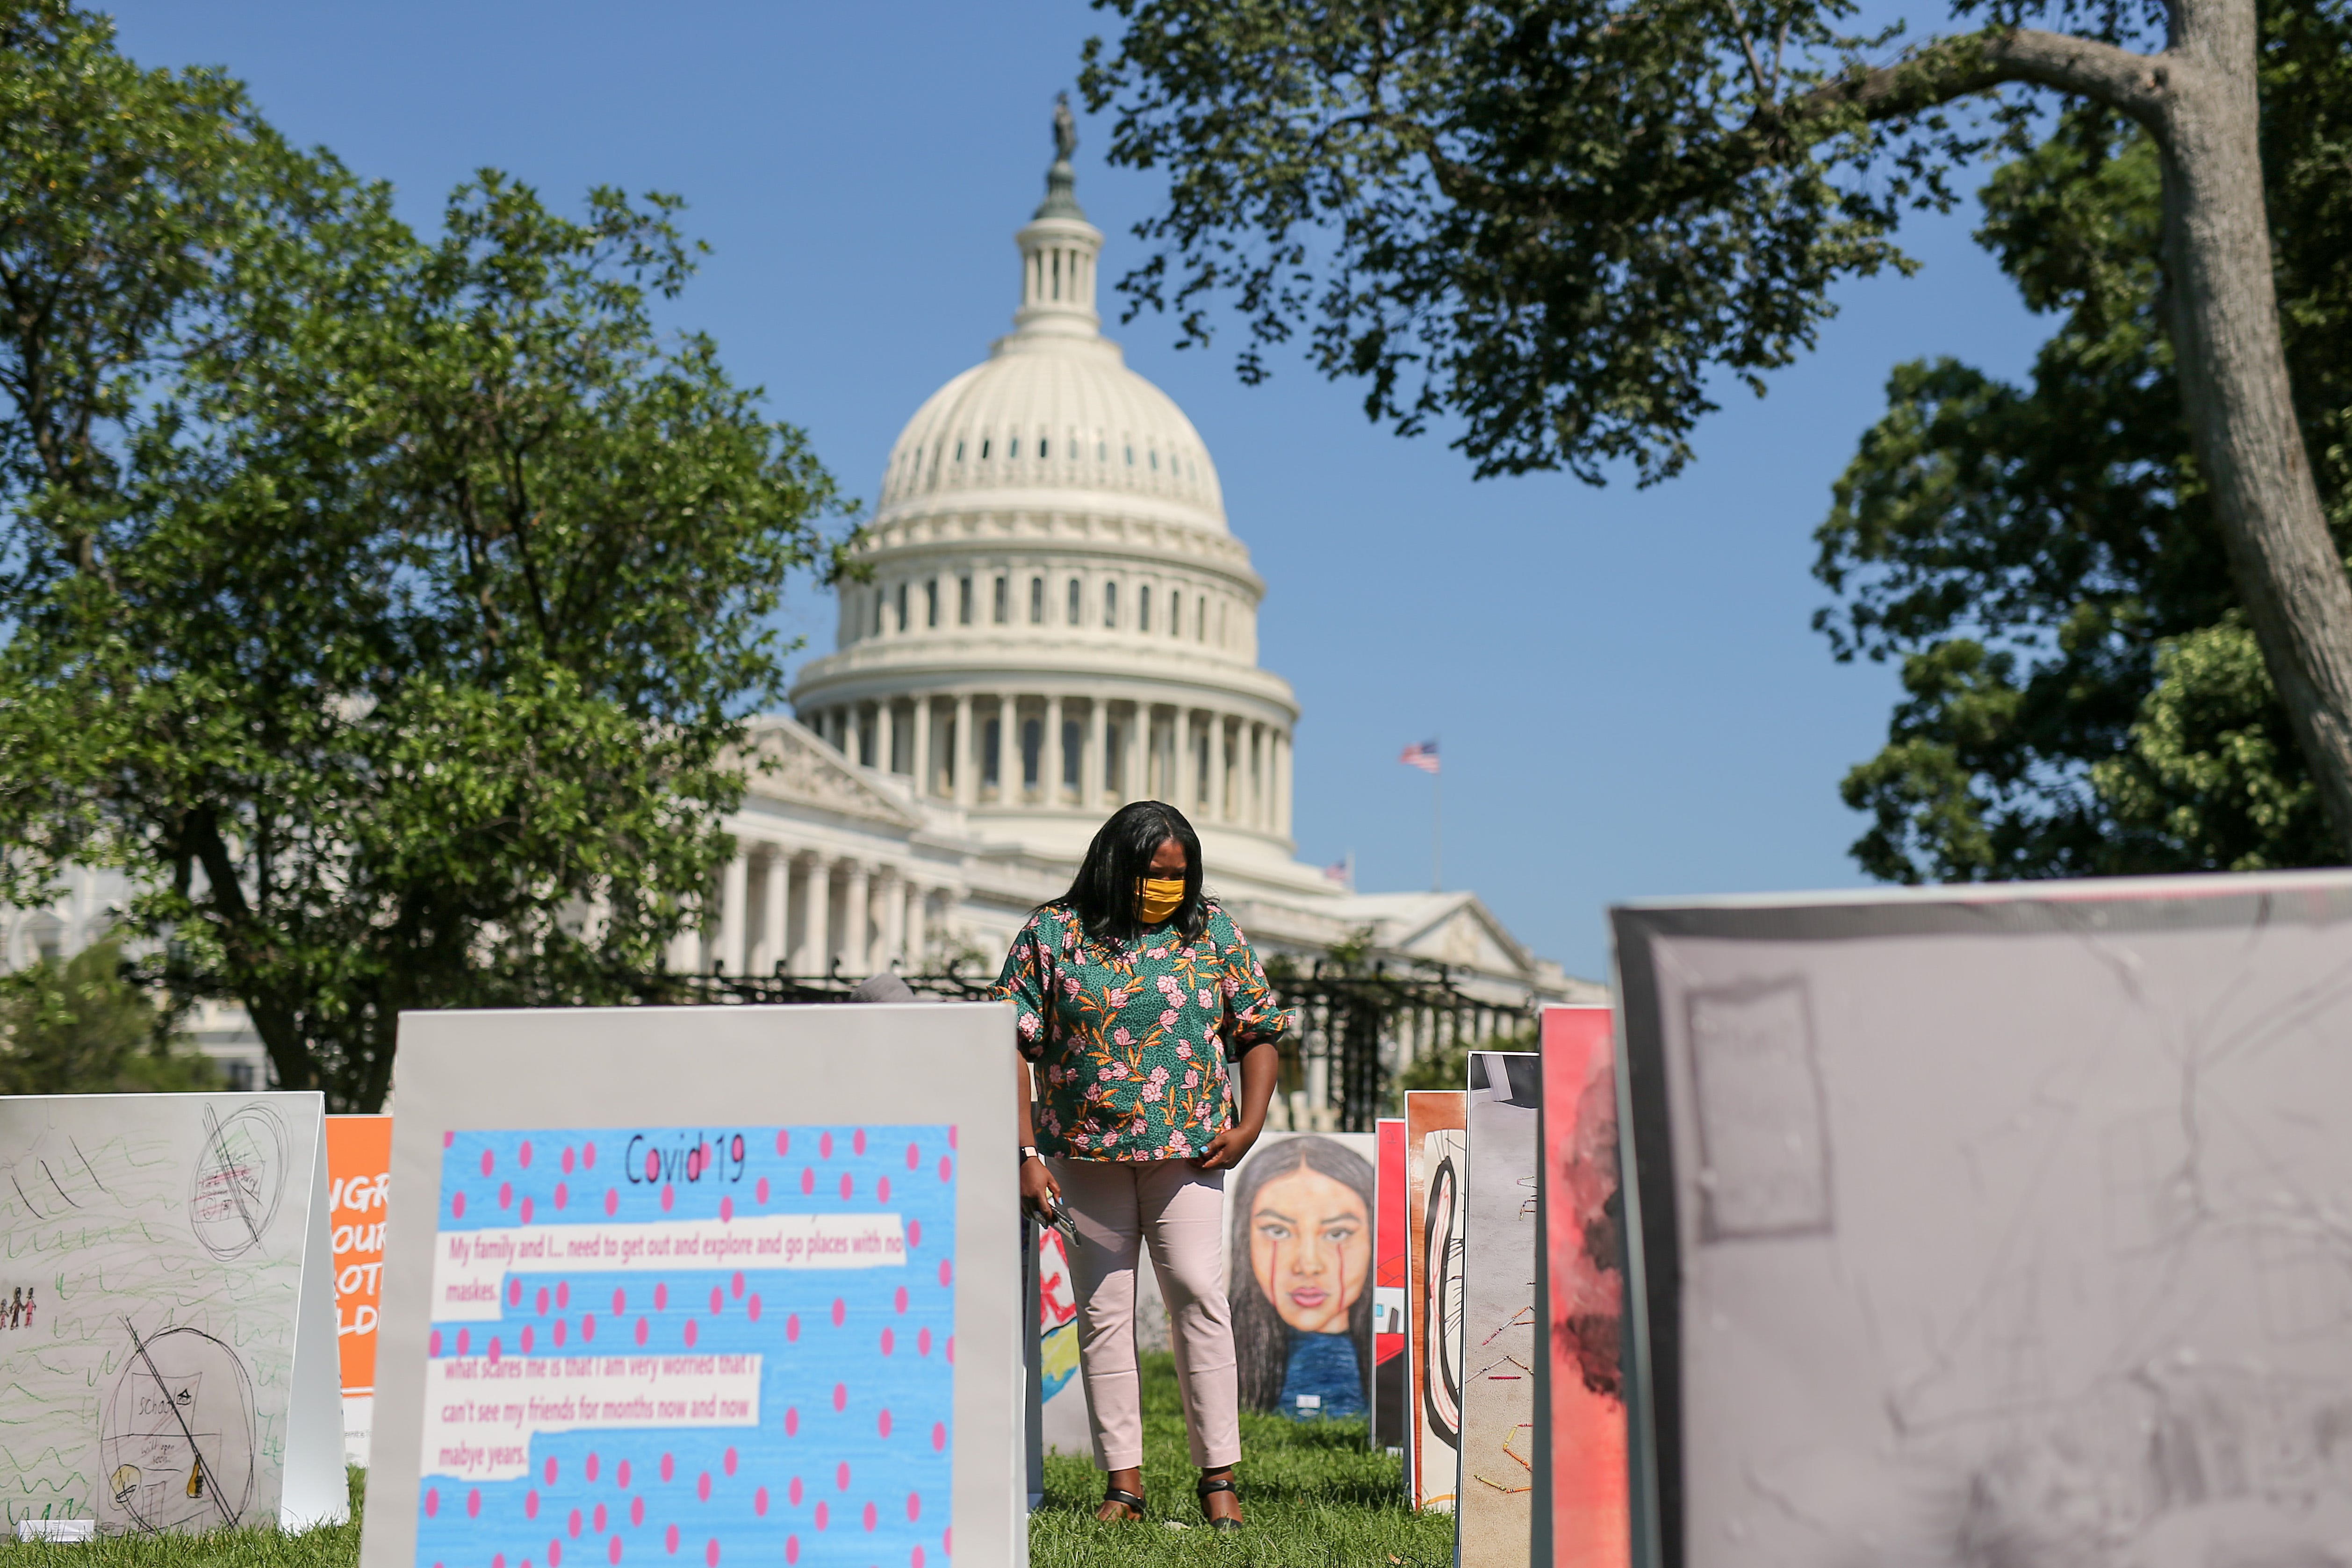 Dominique Spencer looks at an art installation produced by ParentsTogether on Capitol Hill on Aug. 5, 2020. The artwork came from children across the country who described their suffering, anxiety and hopes during the coronavirus pandemic.